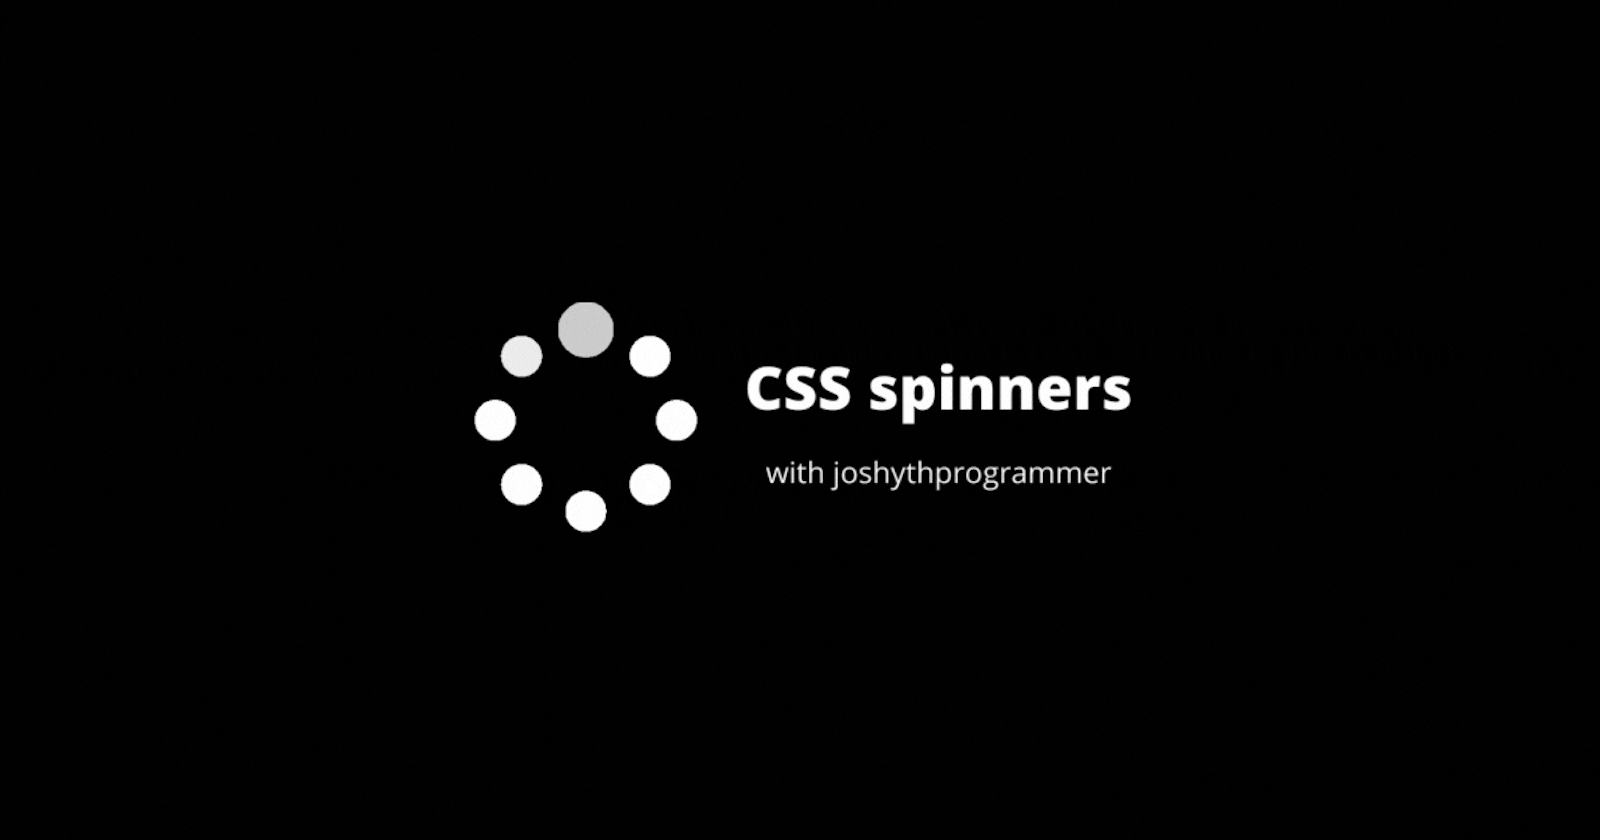 How to create a spinner/loader UI with HTML and CSS